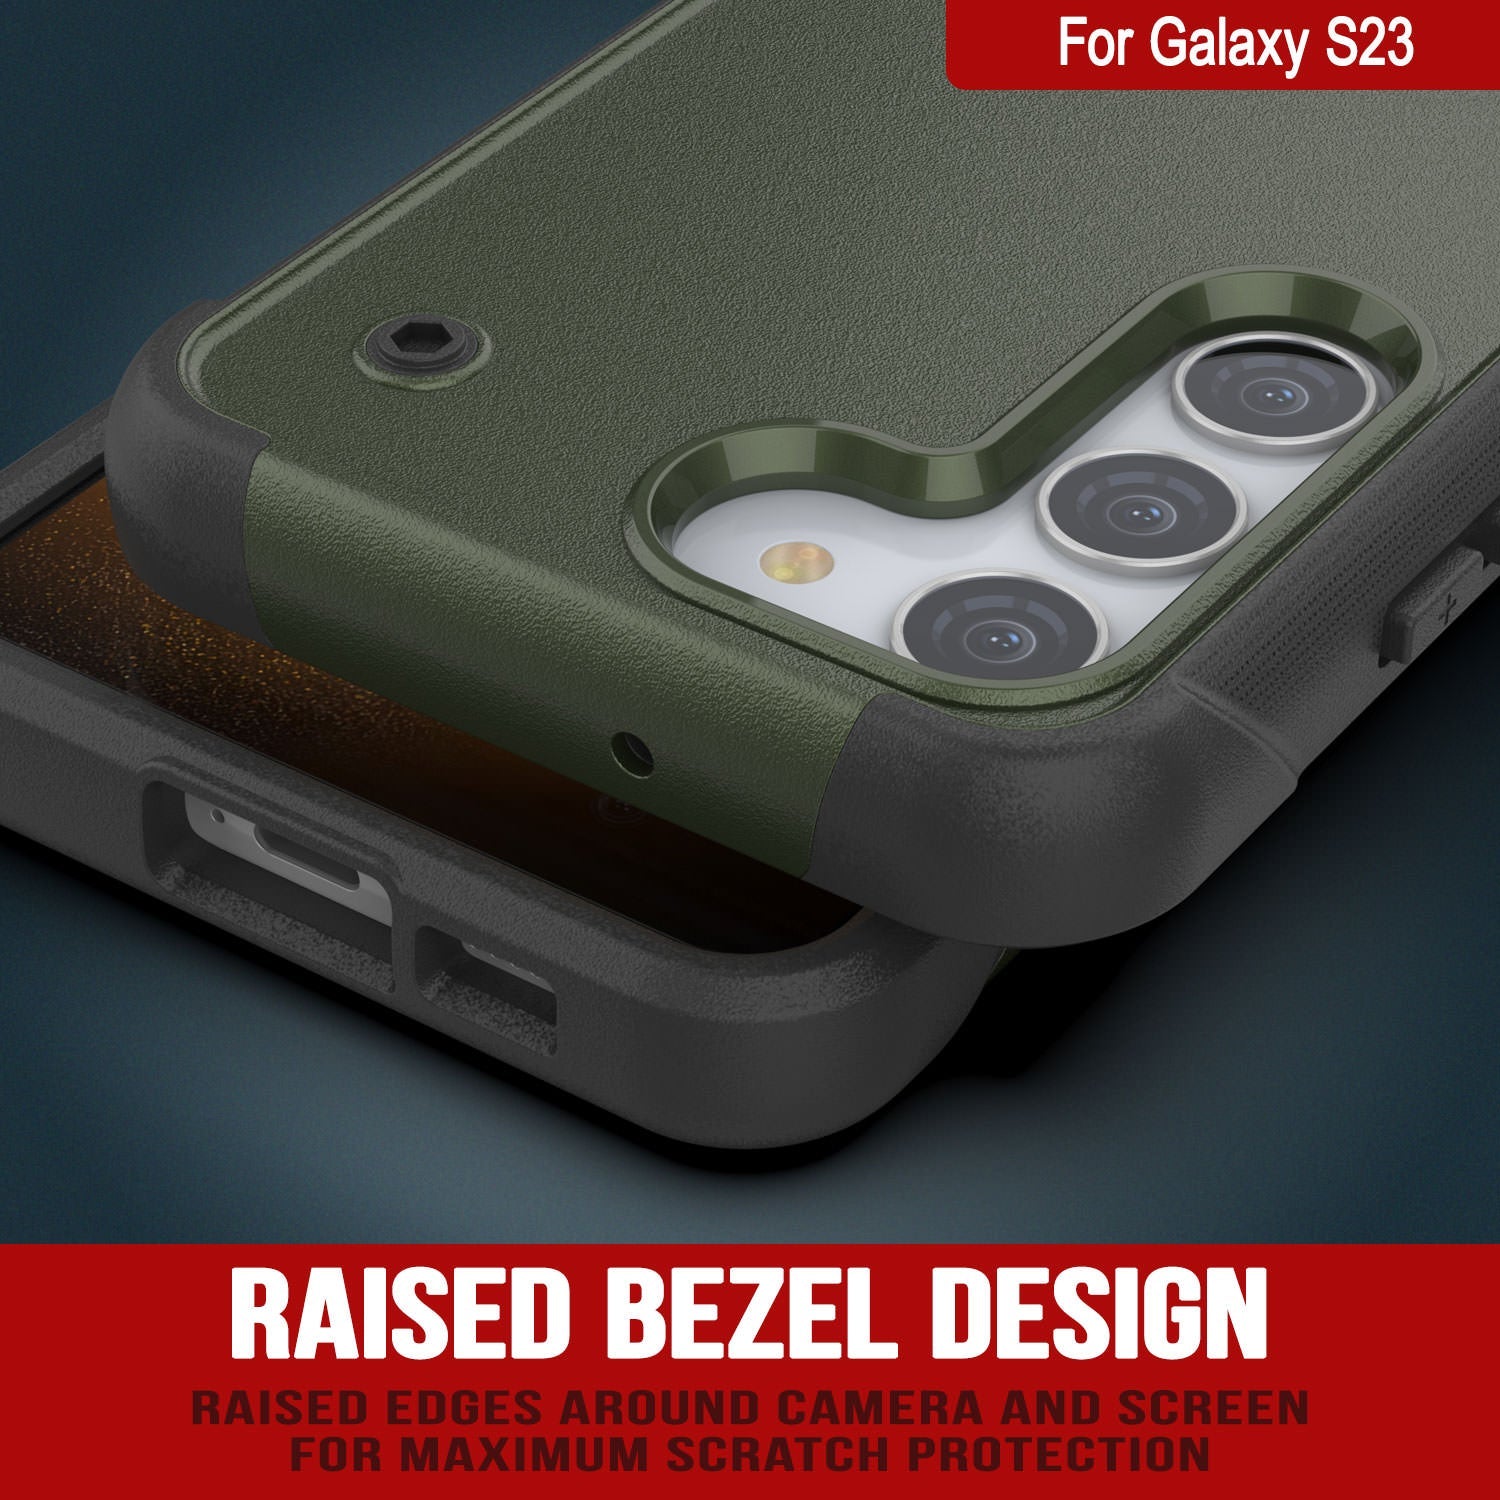 Punkcase Galaxy S24 Case [Reliance Series] Protective Hybrid Military Grade Cover W/Built-in Kickstand [Army Green-Black]